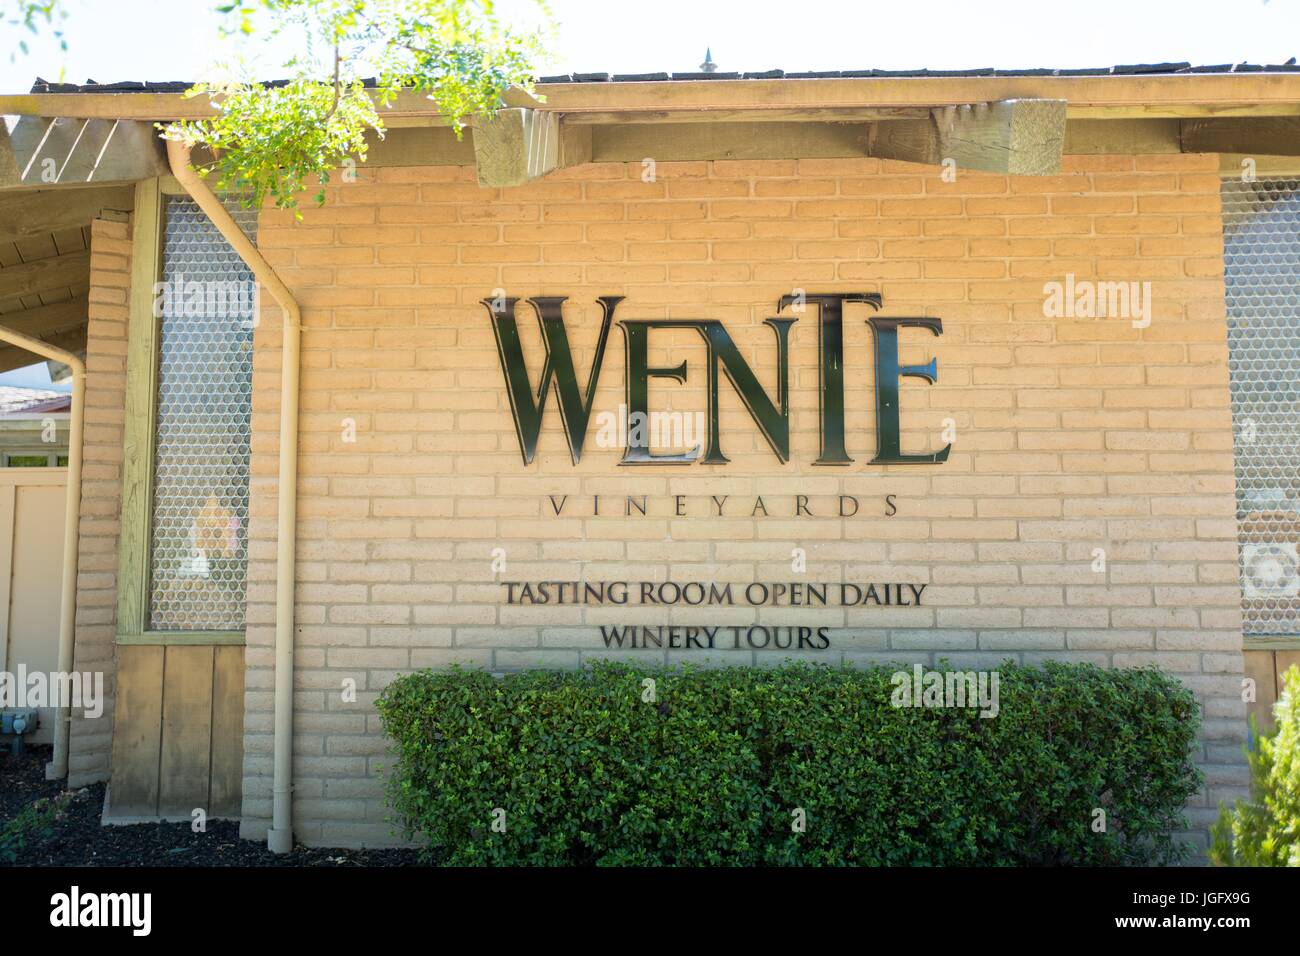 Signage for the tasting room at Wente winery in Livermore Wine Country, Livermore, California, June 25, 2017. Founded in 1883, Wente is the United States' oldest continuously operating family owned vineyard. Stock Photo